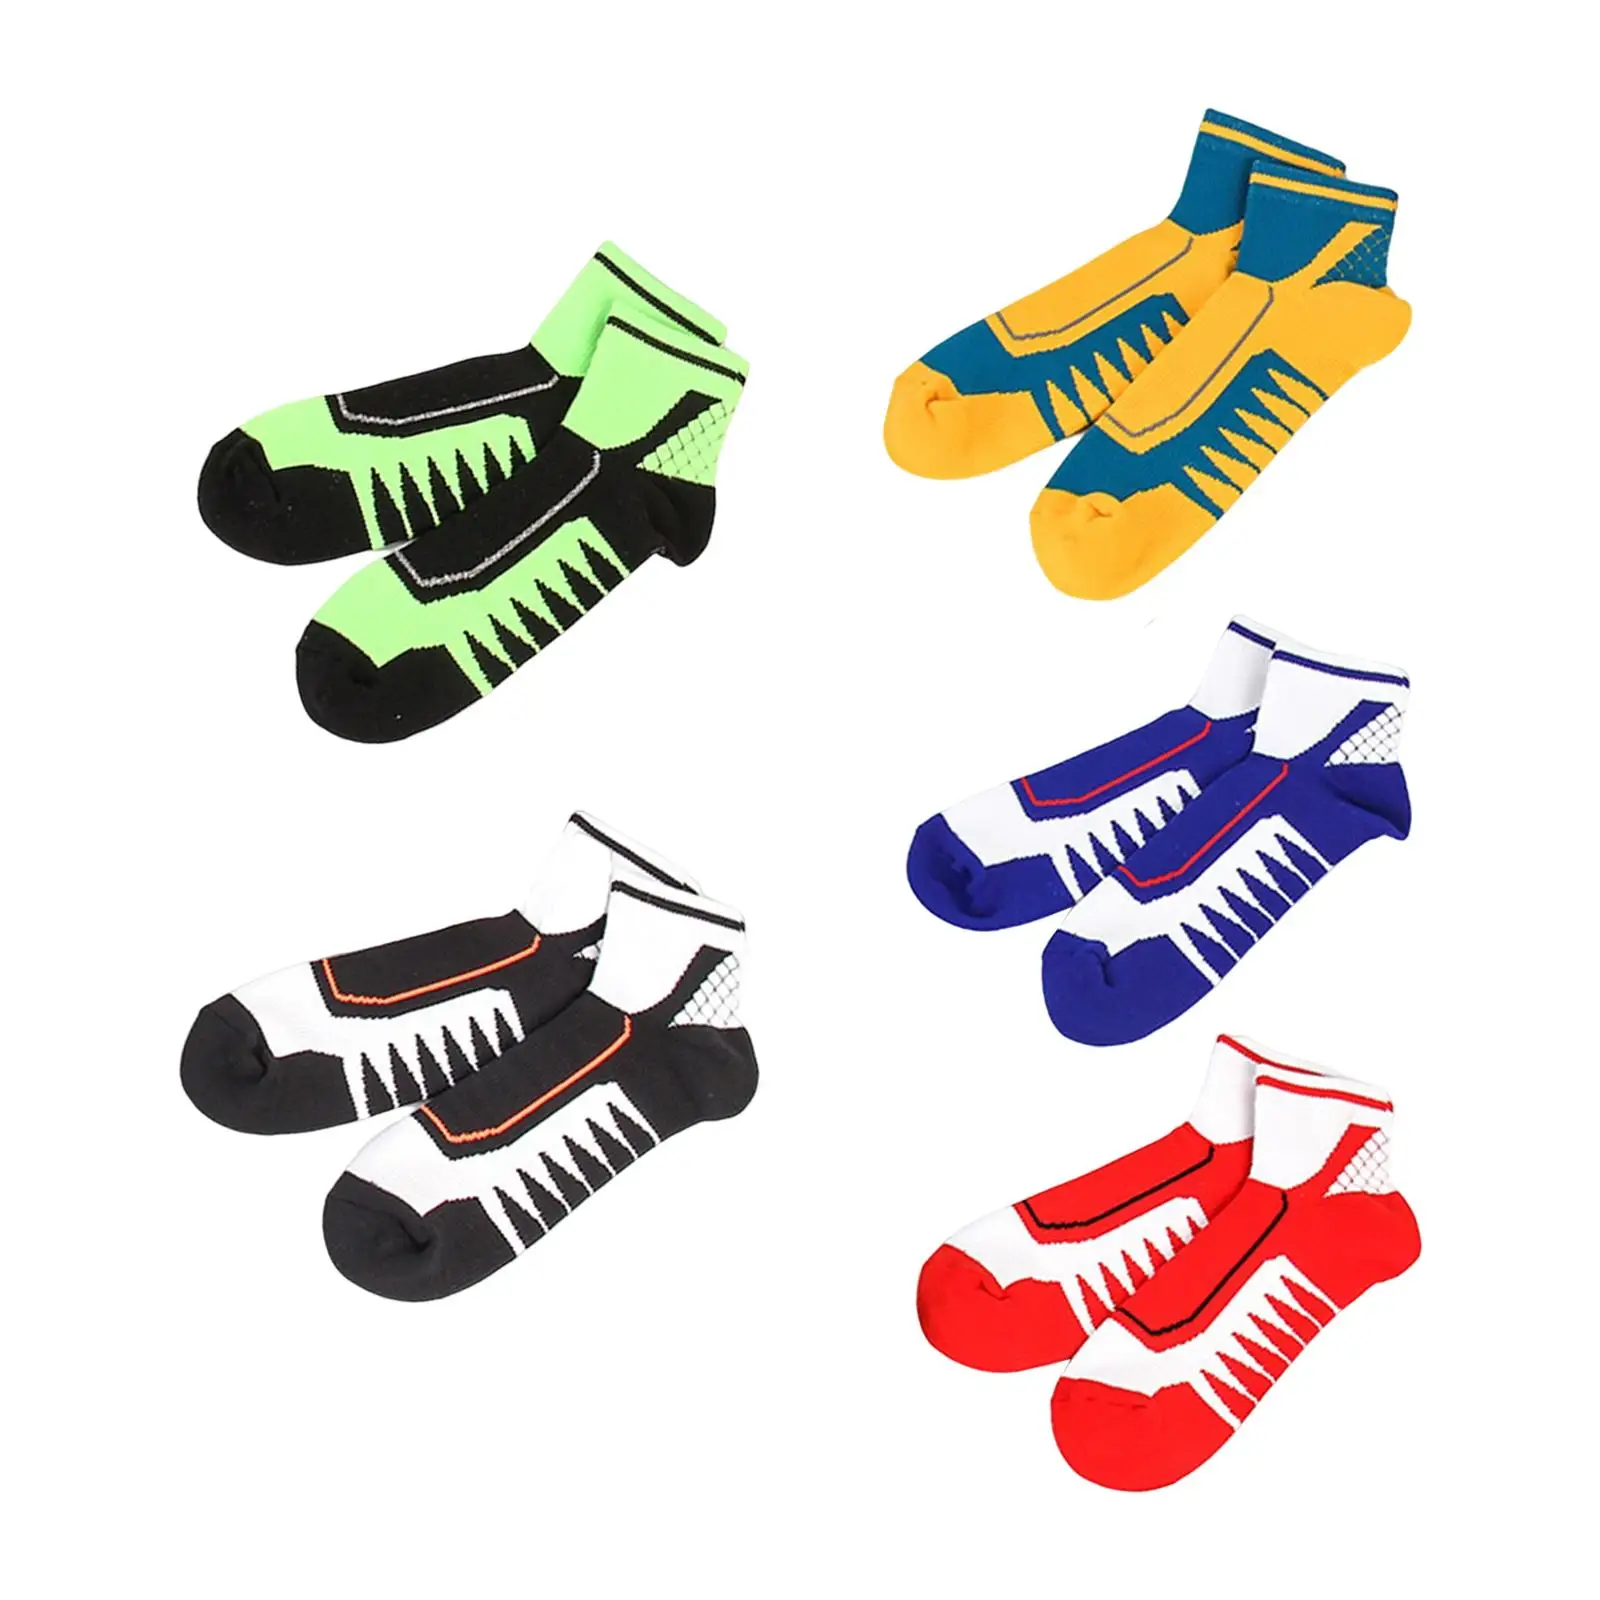 Fashion 5 Pairs Men Crew Socks Trouser Casual Soft Athletic Sports Ankle Socks for Home Bedroom Indoor Outdoor Hiking Basketball